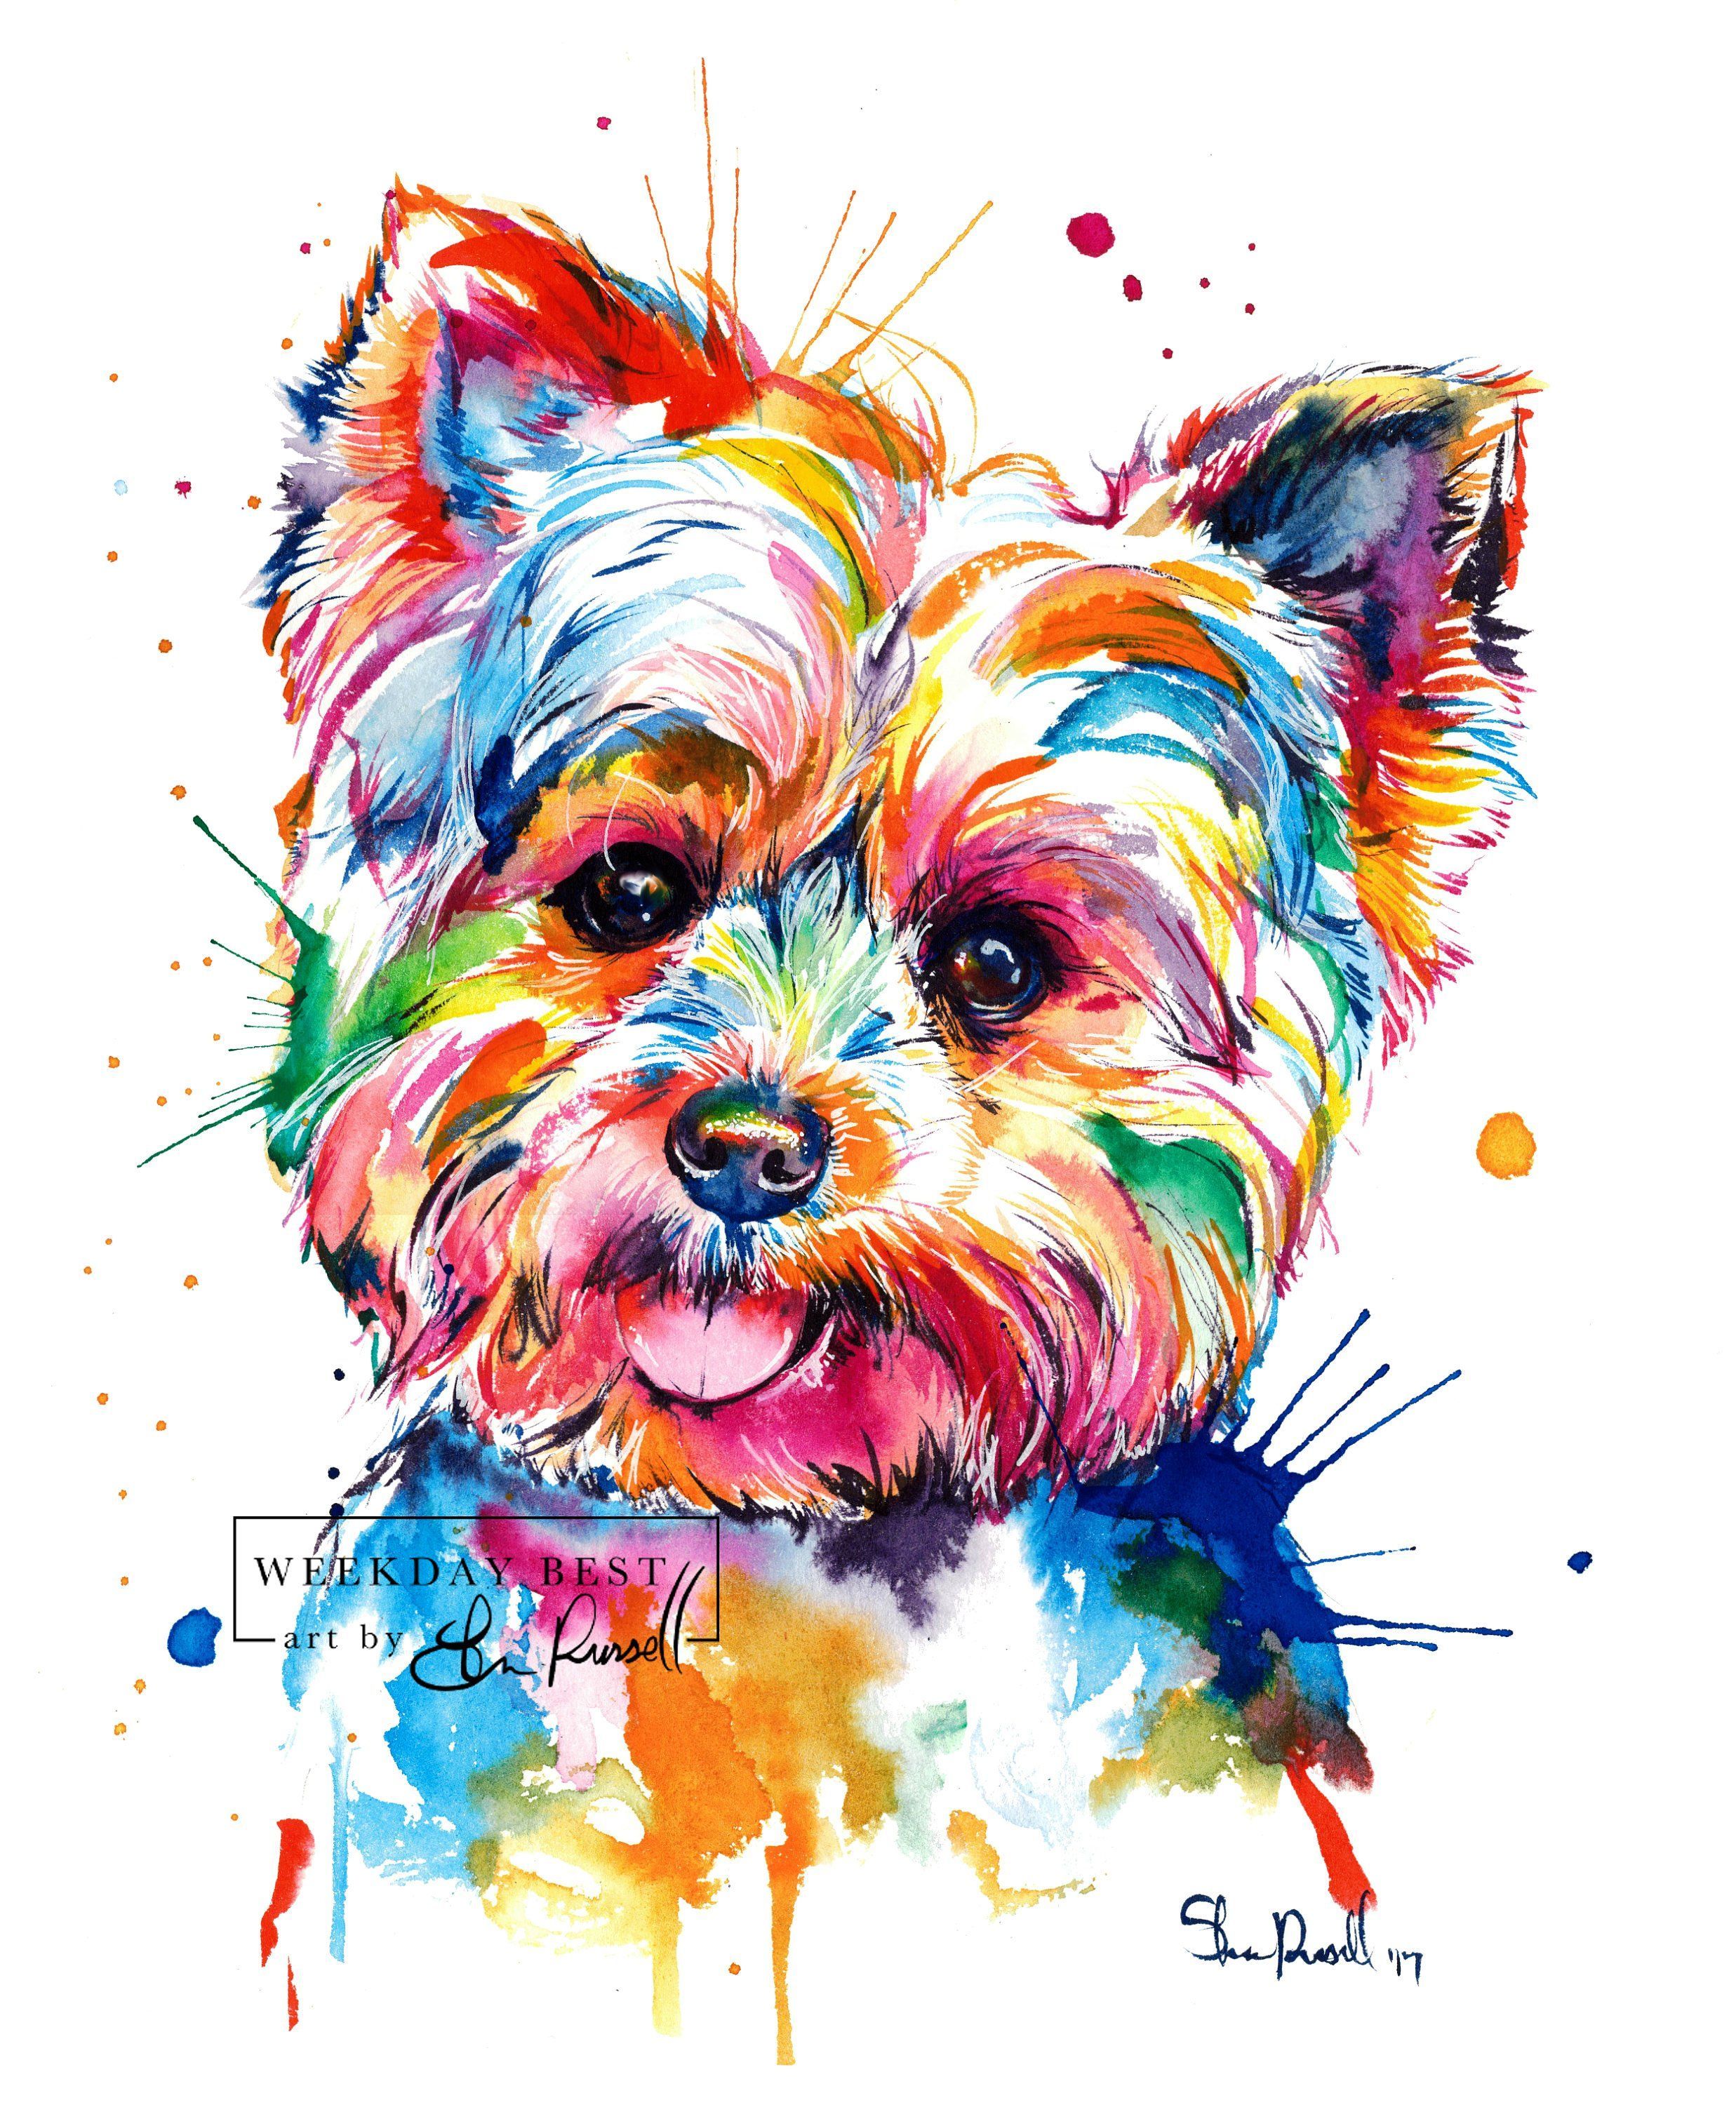 Colorful Dog Painting Wallpapers - Wallpaper Cave